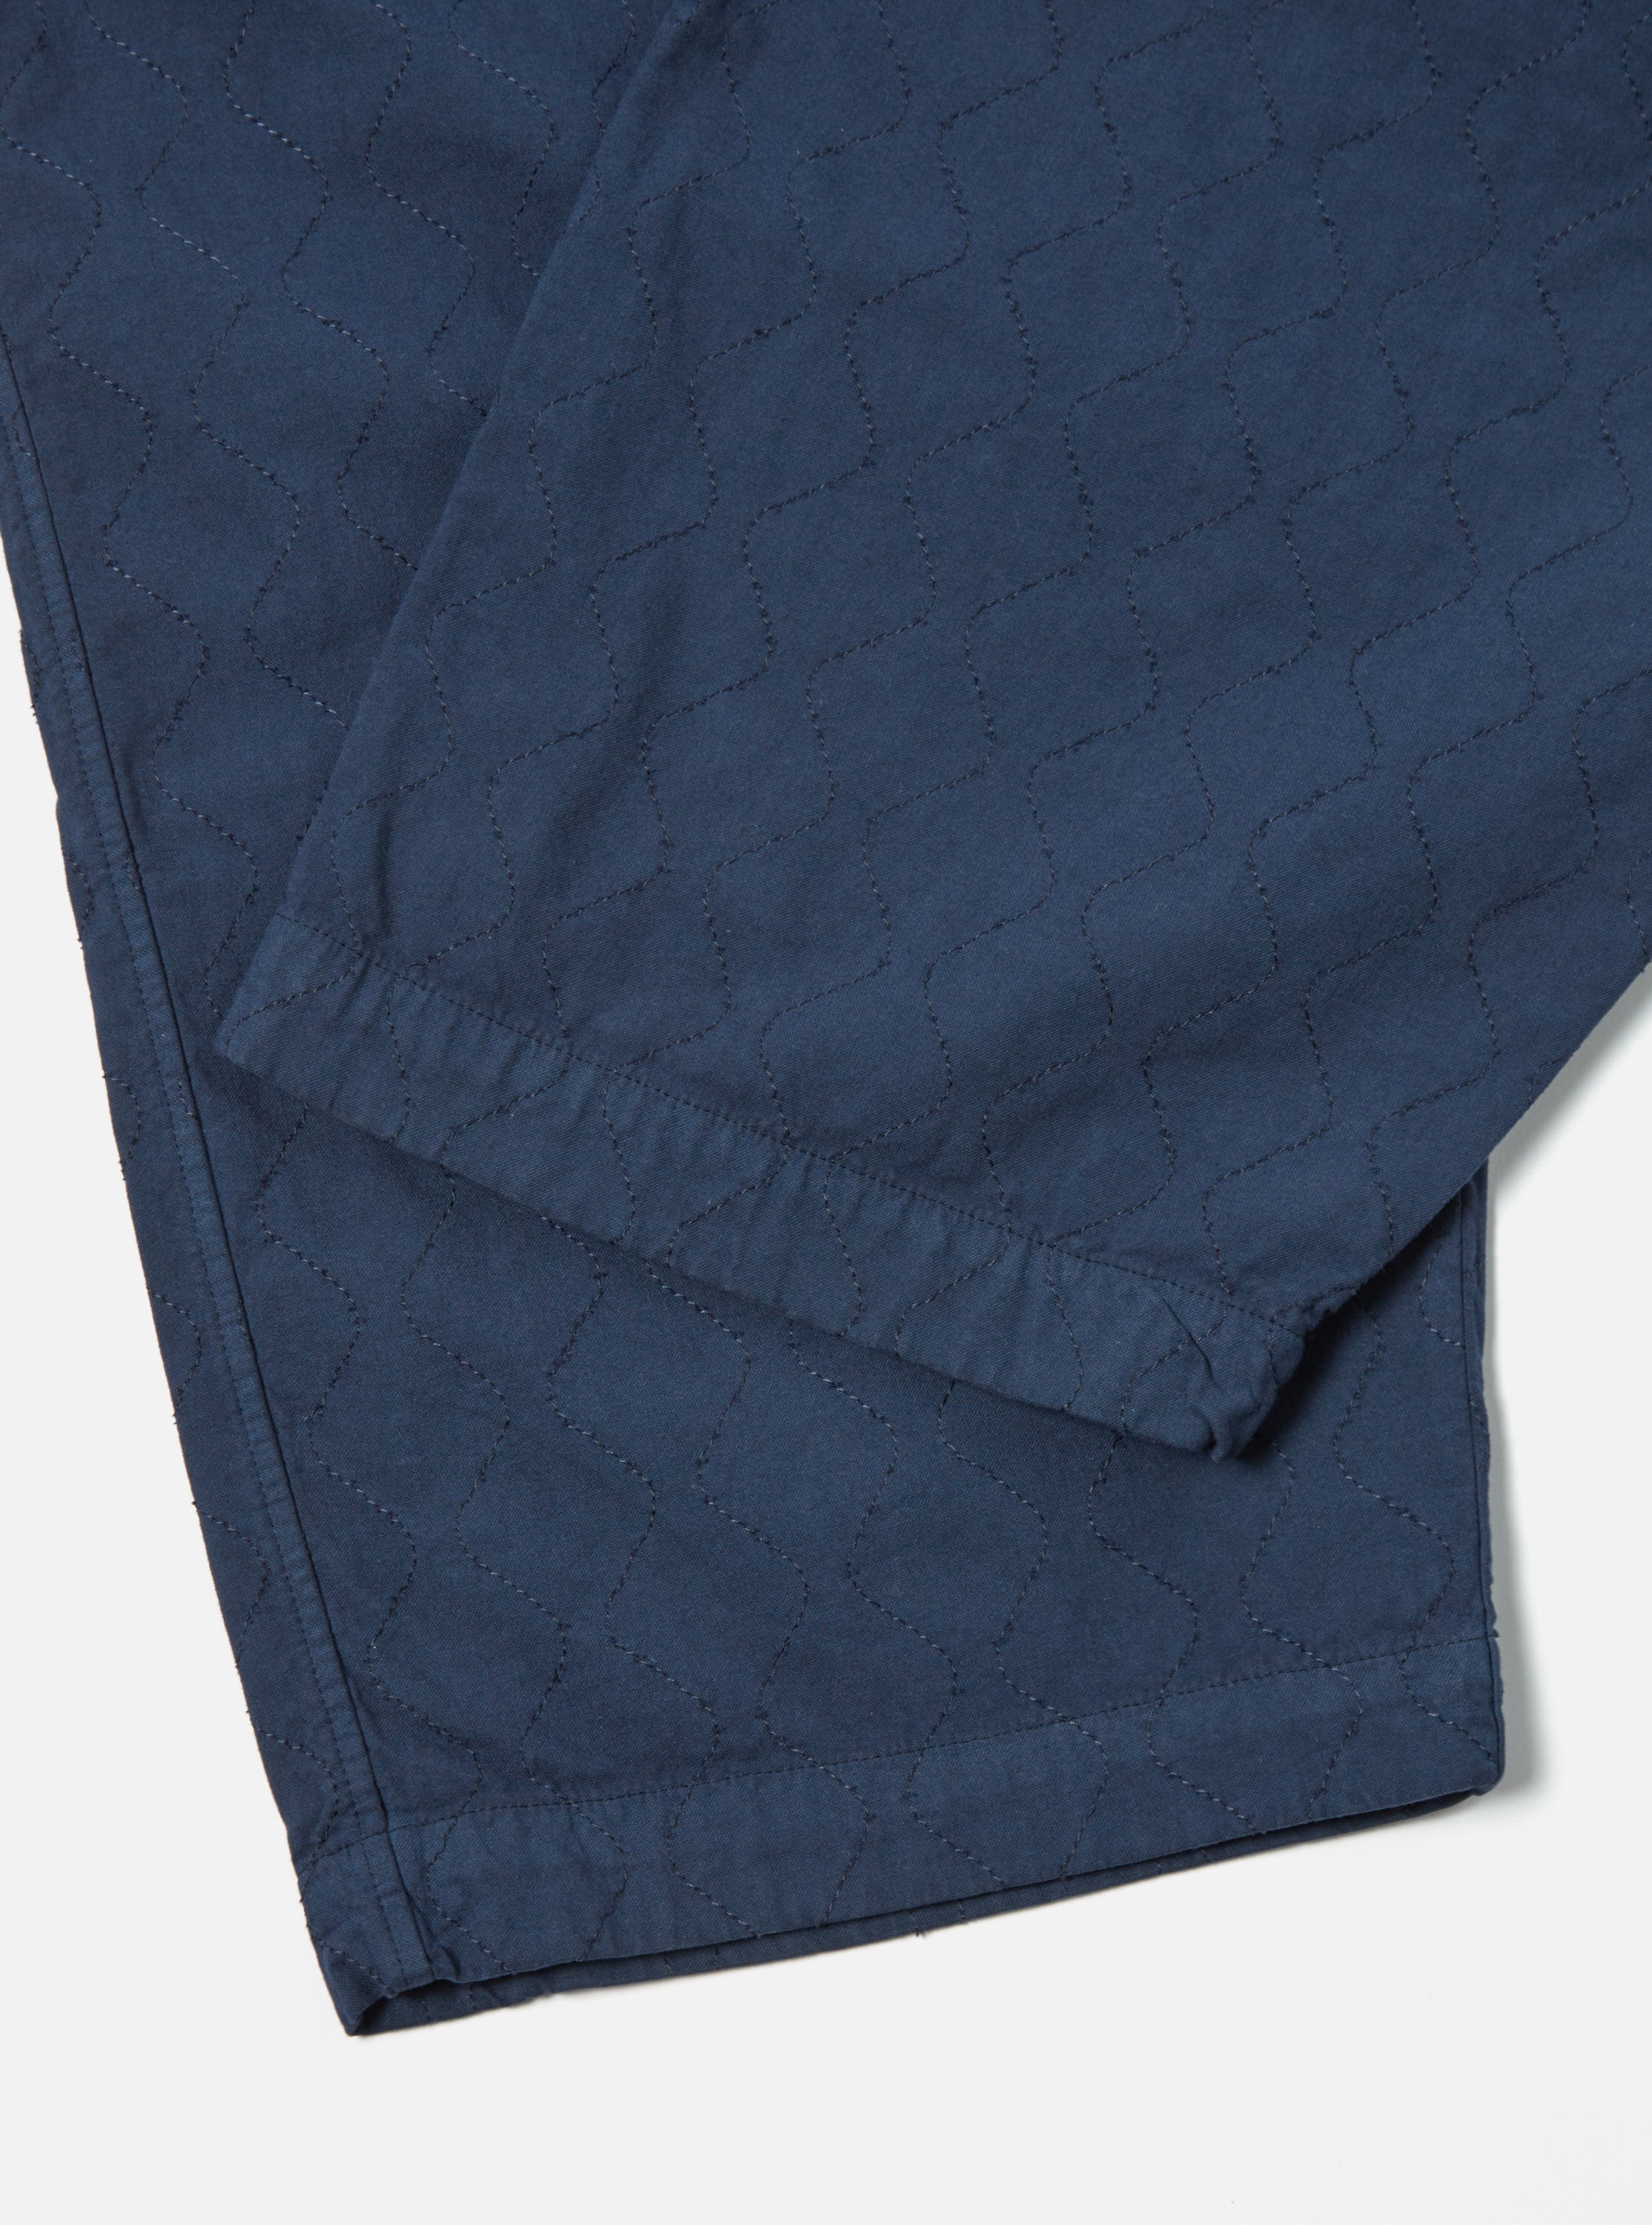 Universal Works Quilted Oxford Pant in Navy Cotton